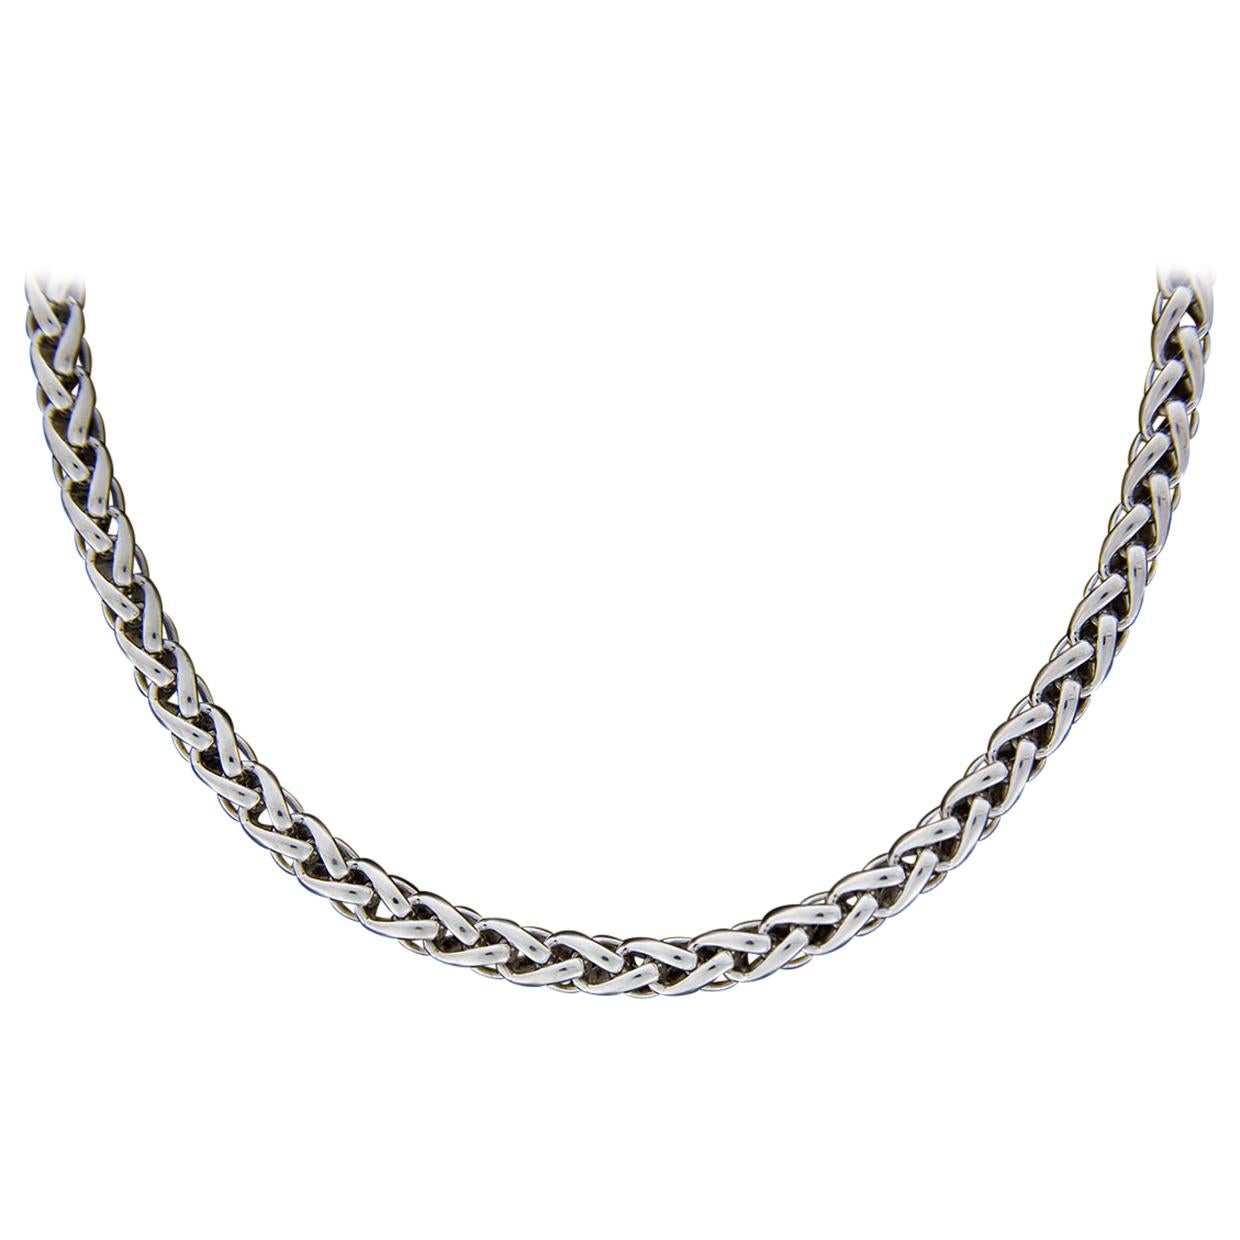 David Yurman Silver & Gold Classic Wheat Chain Necklace with Hook Clasp